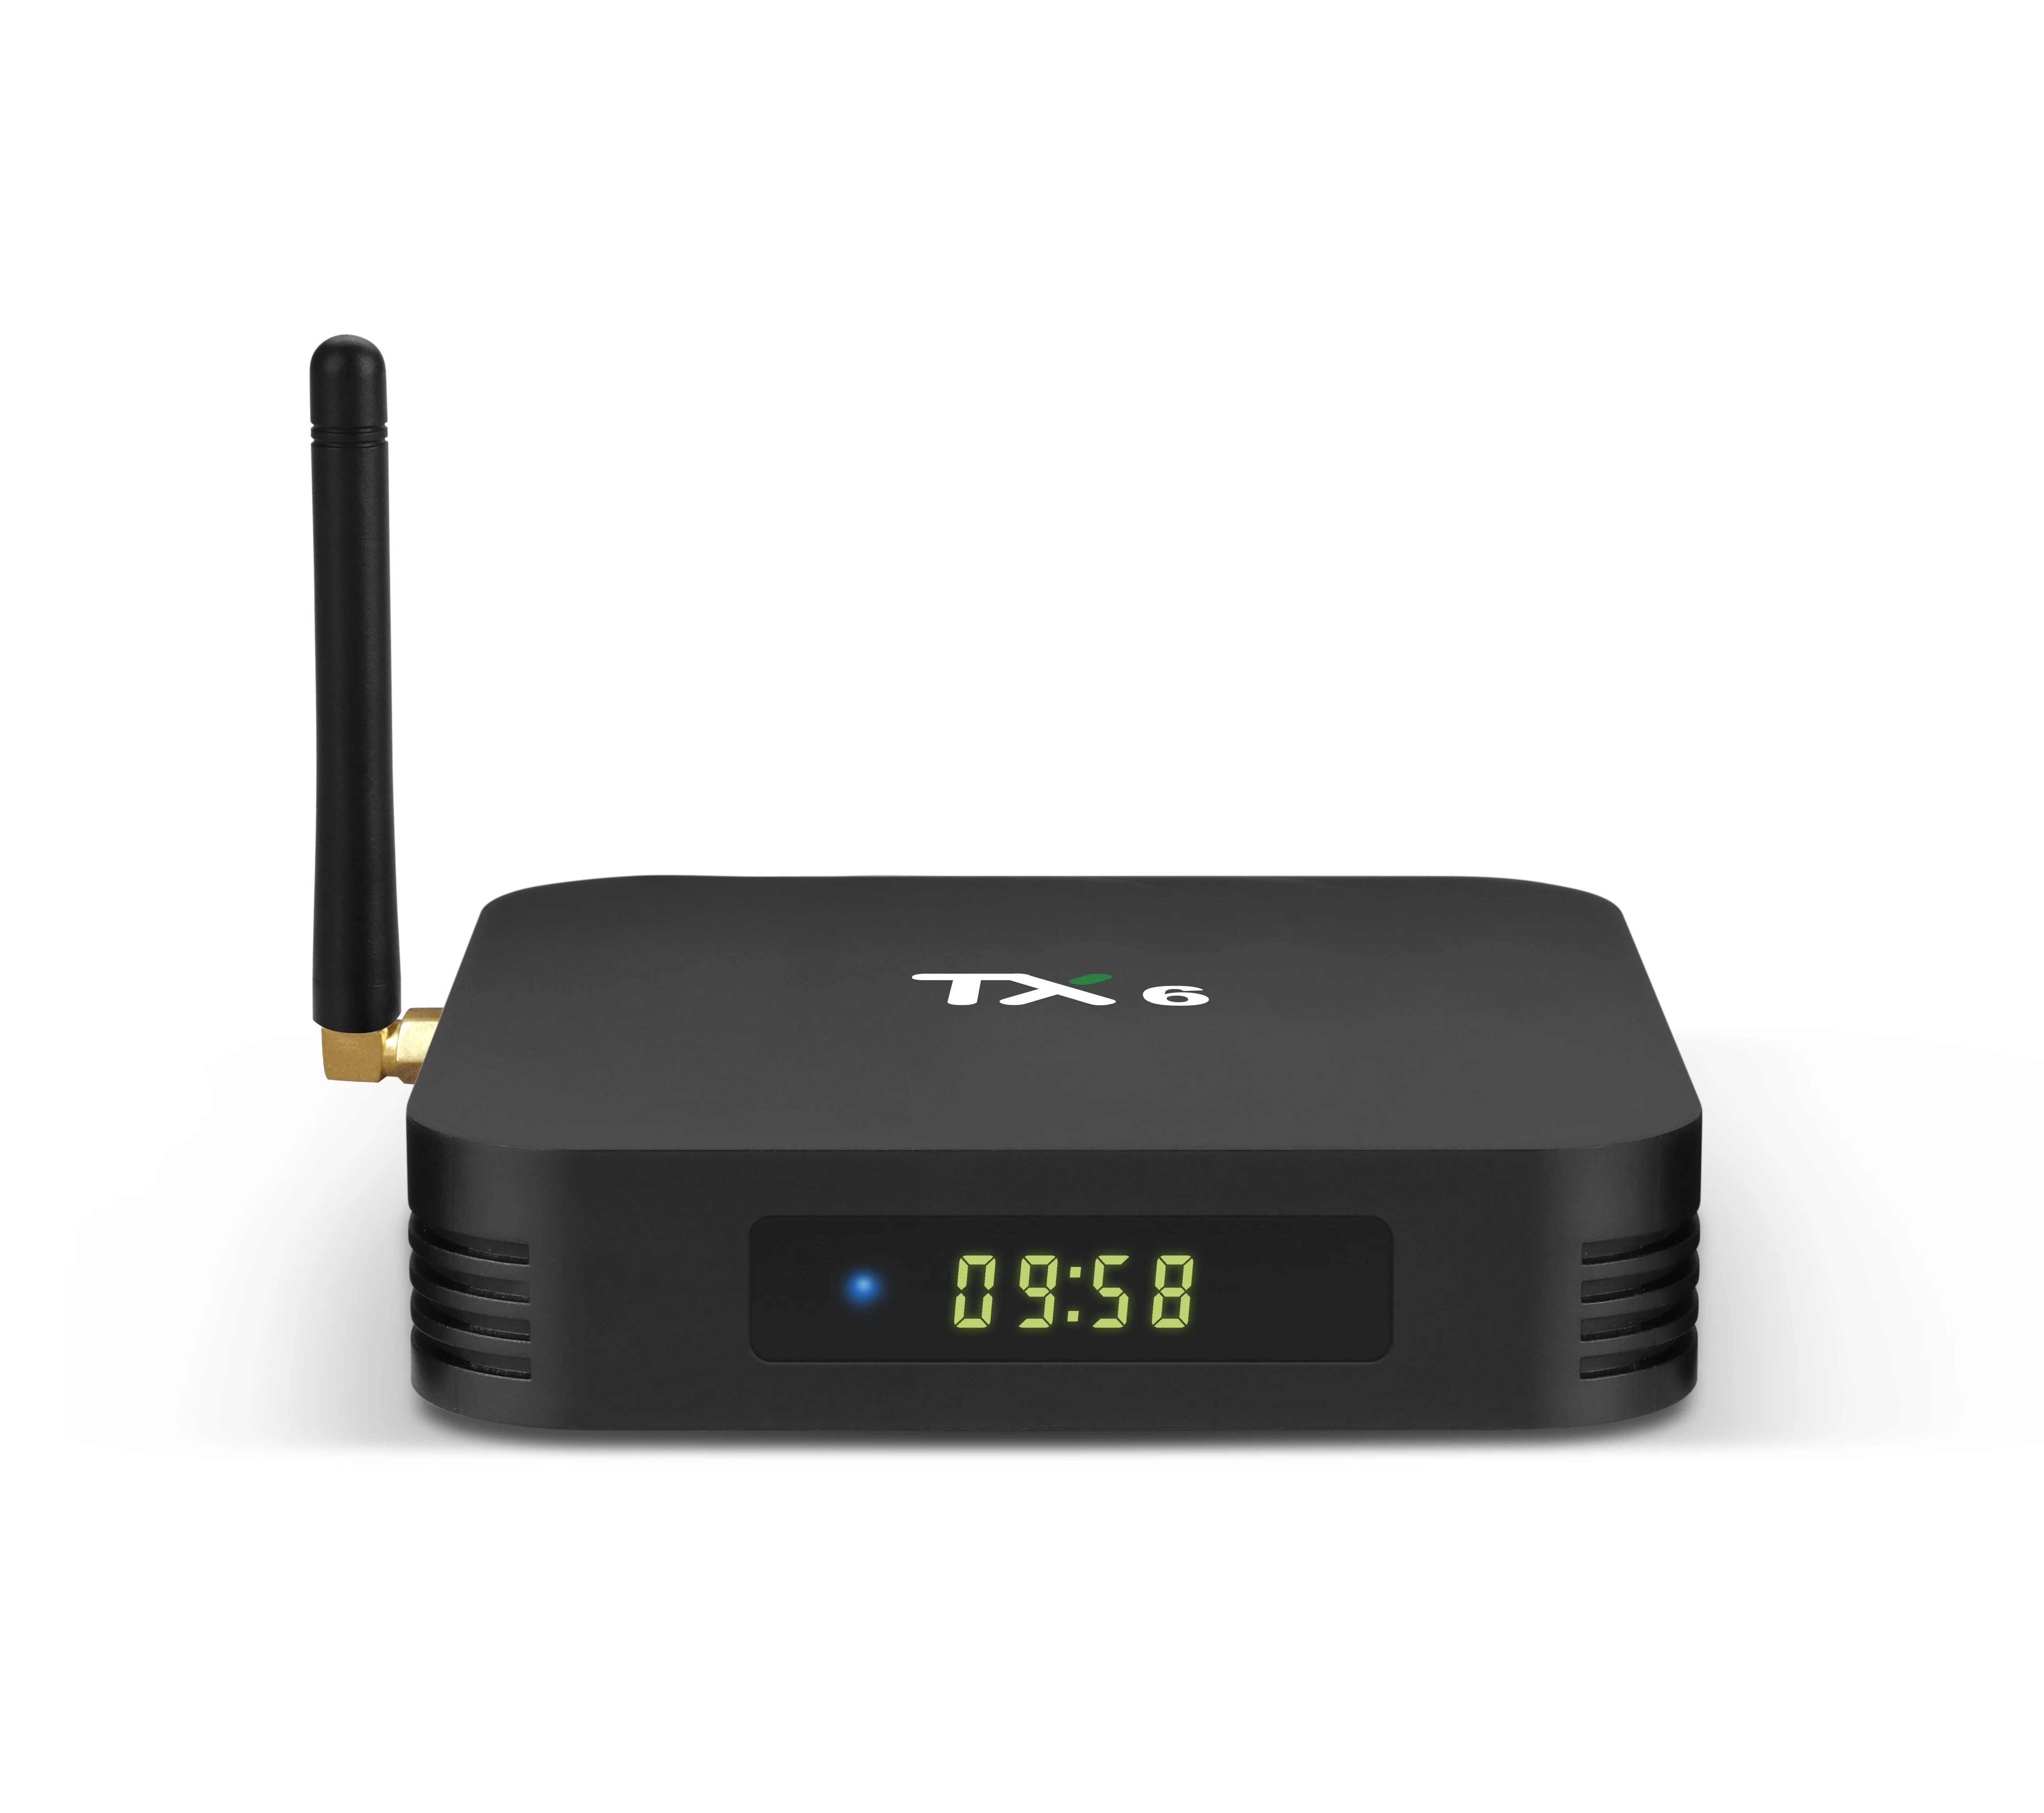 

Tanix tx6 tv android box 4gb/32gb android 9.0 download user manual for tx6 with dual wifi 2.4g/5g smart tv box